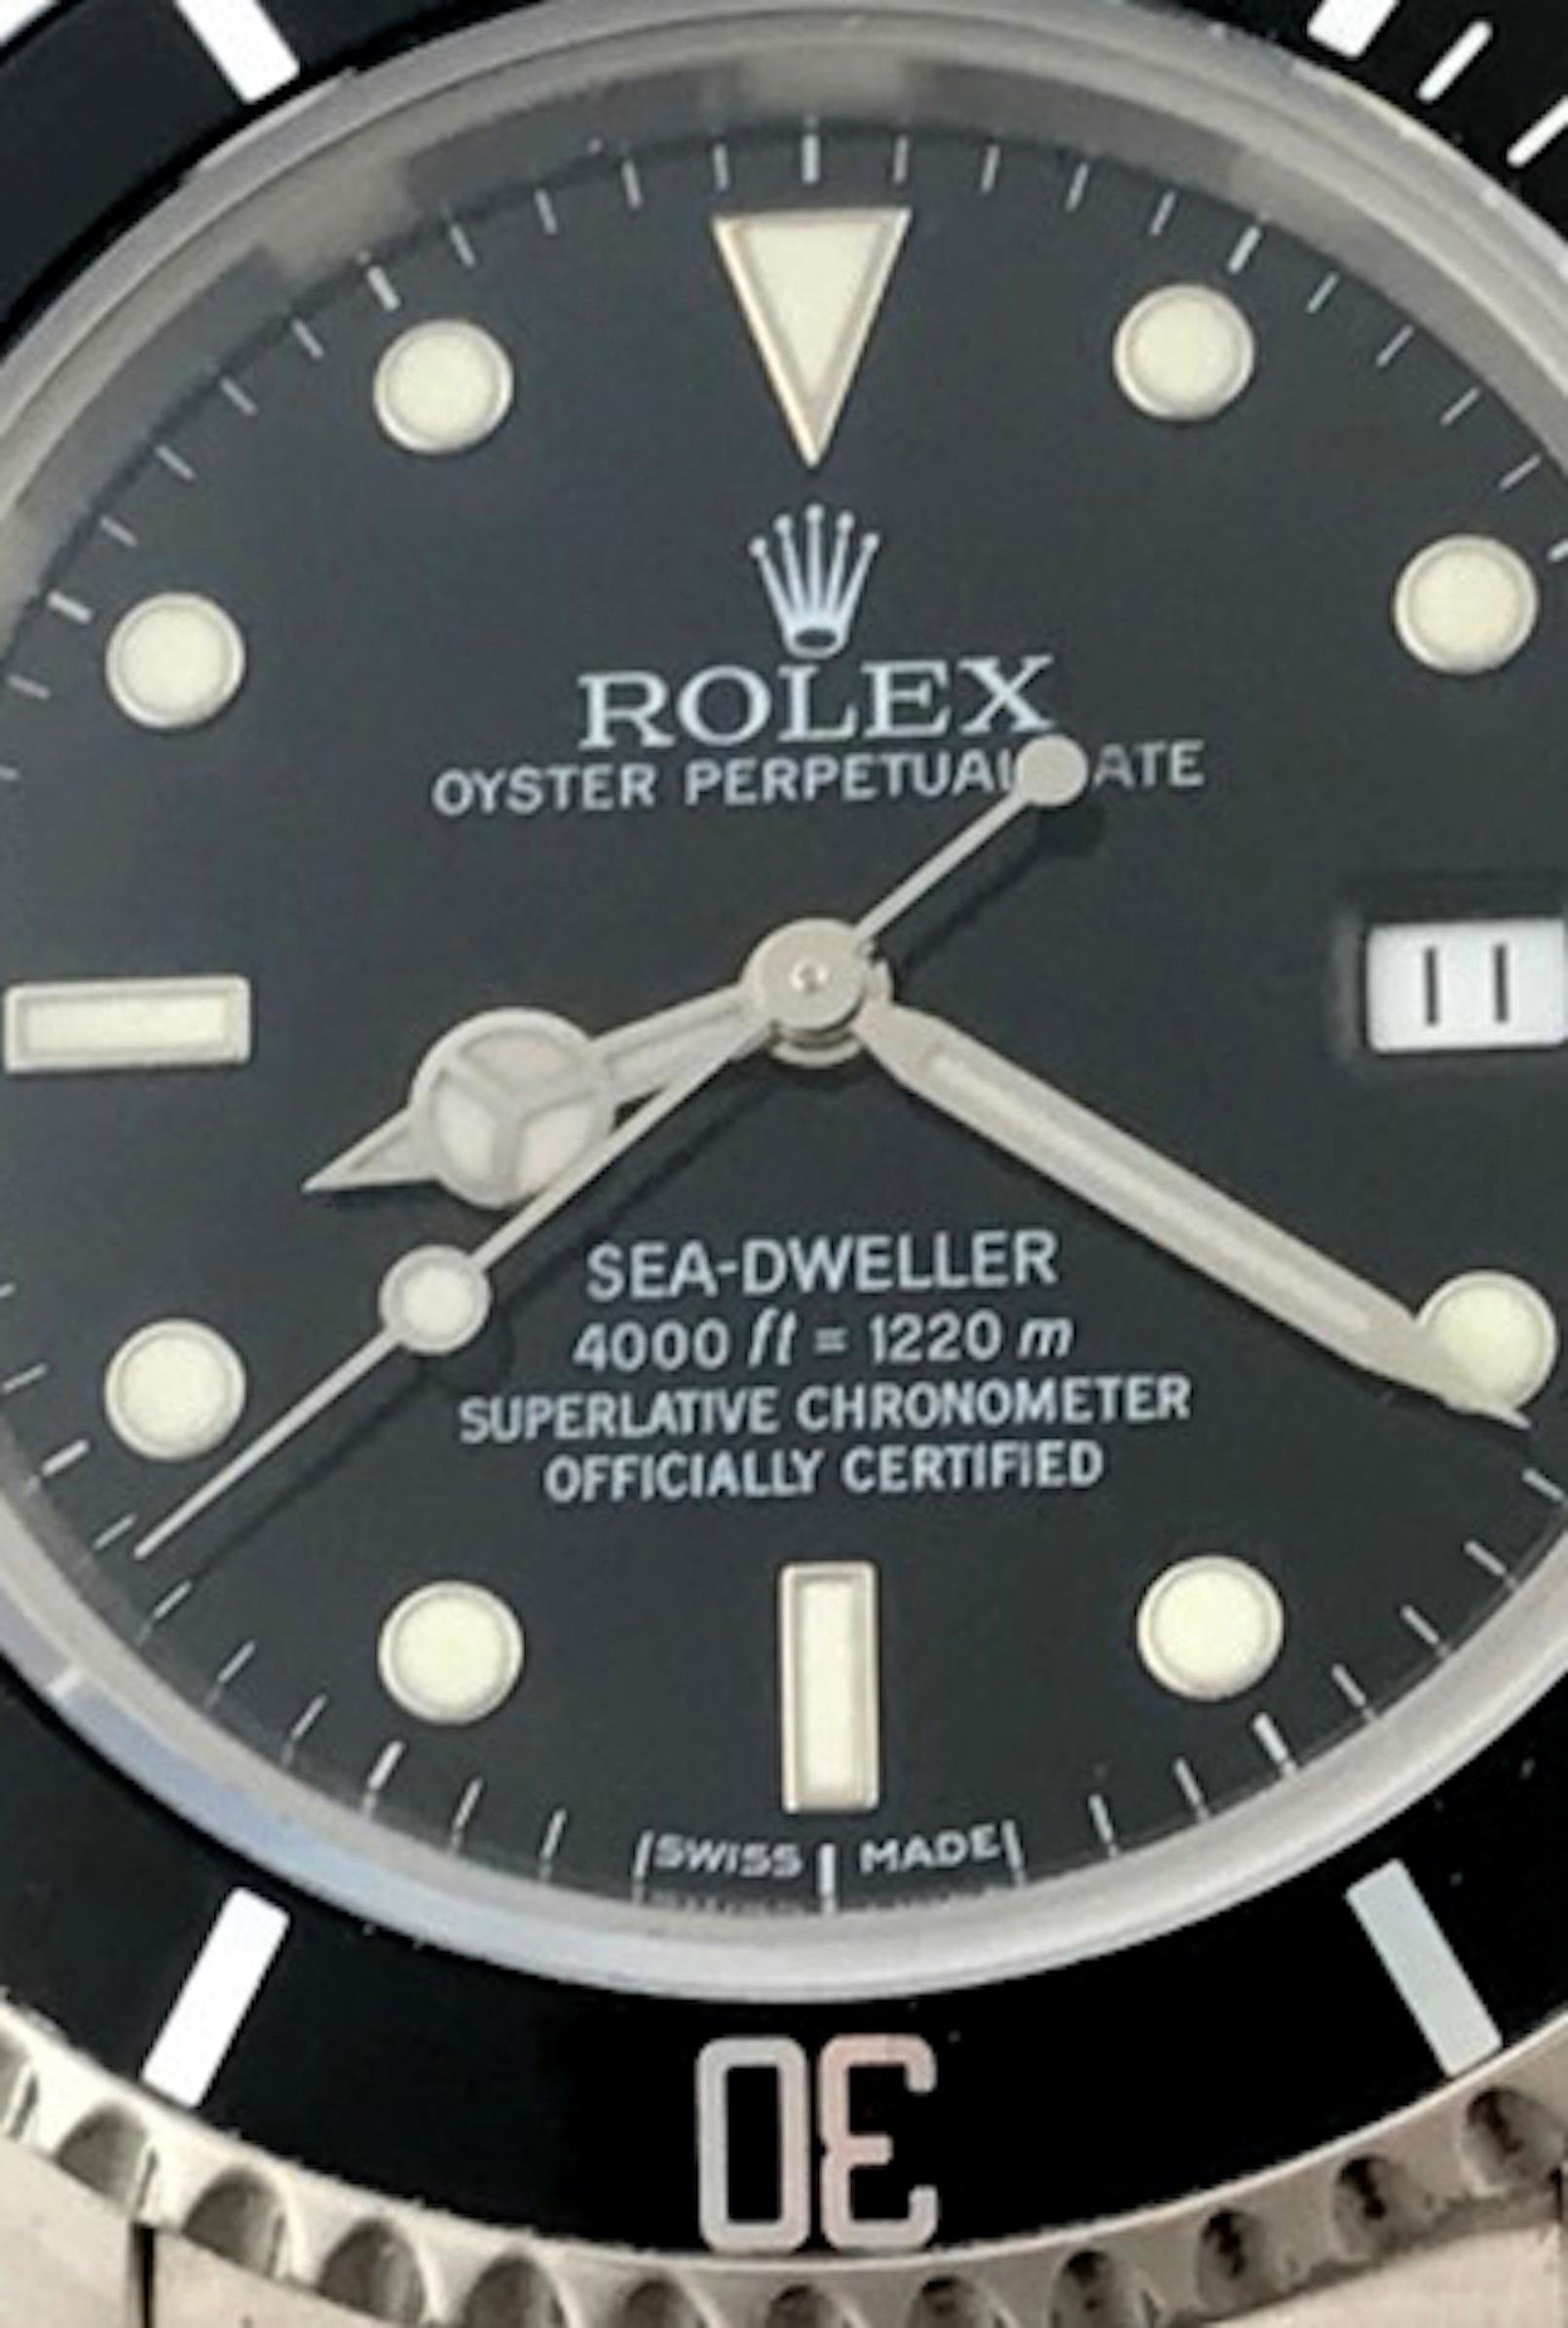 Like New Rolex Mens Sea-Dweller Model 16600 at a great price.  Automatic Winding Oyster Perpetual Date Movement.  Features a stainless steel case, diameter 40mm. Stainless Steel Oyster bracelet with flip-lock clasp. Black Dial with luminous hour